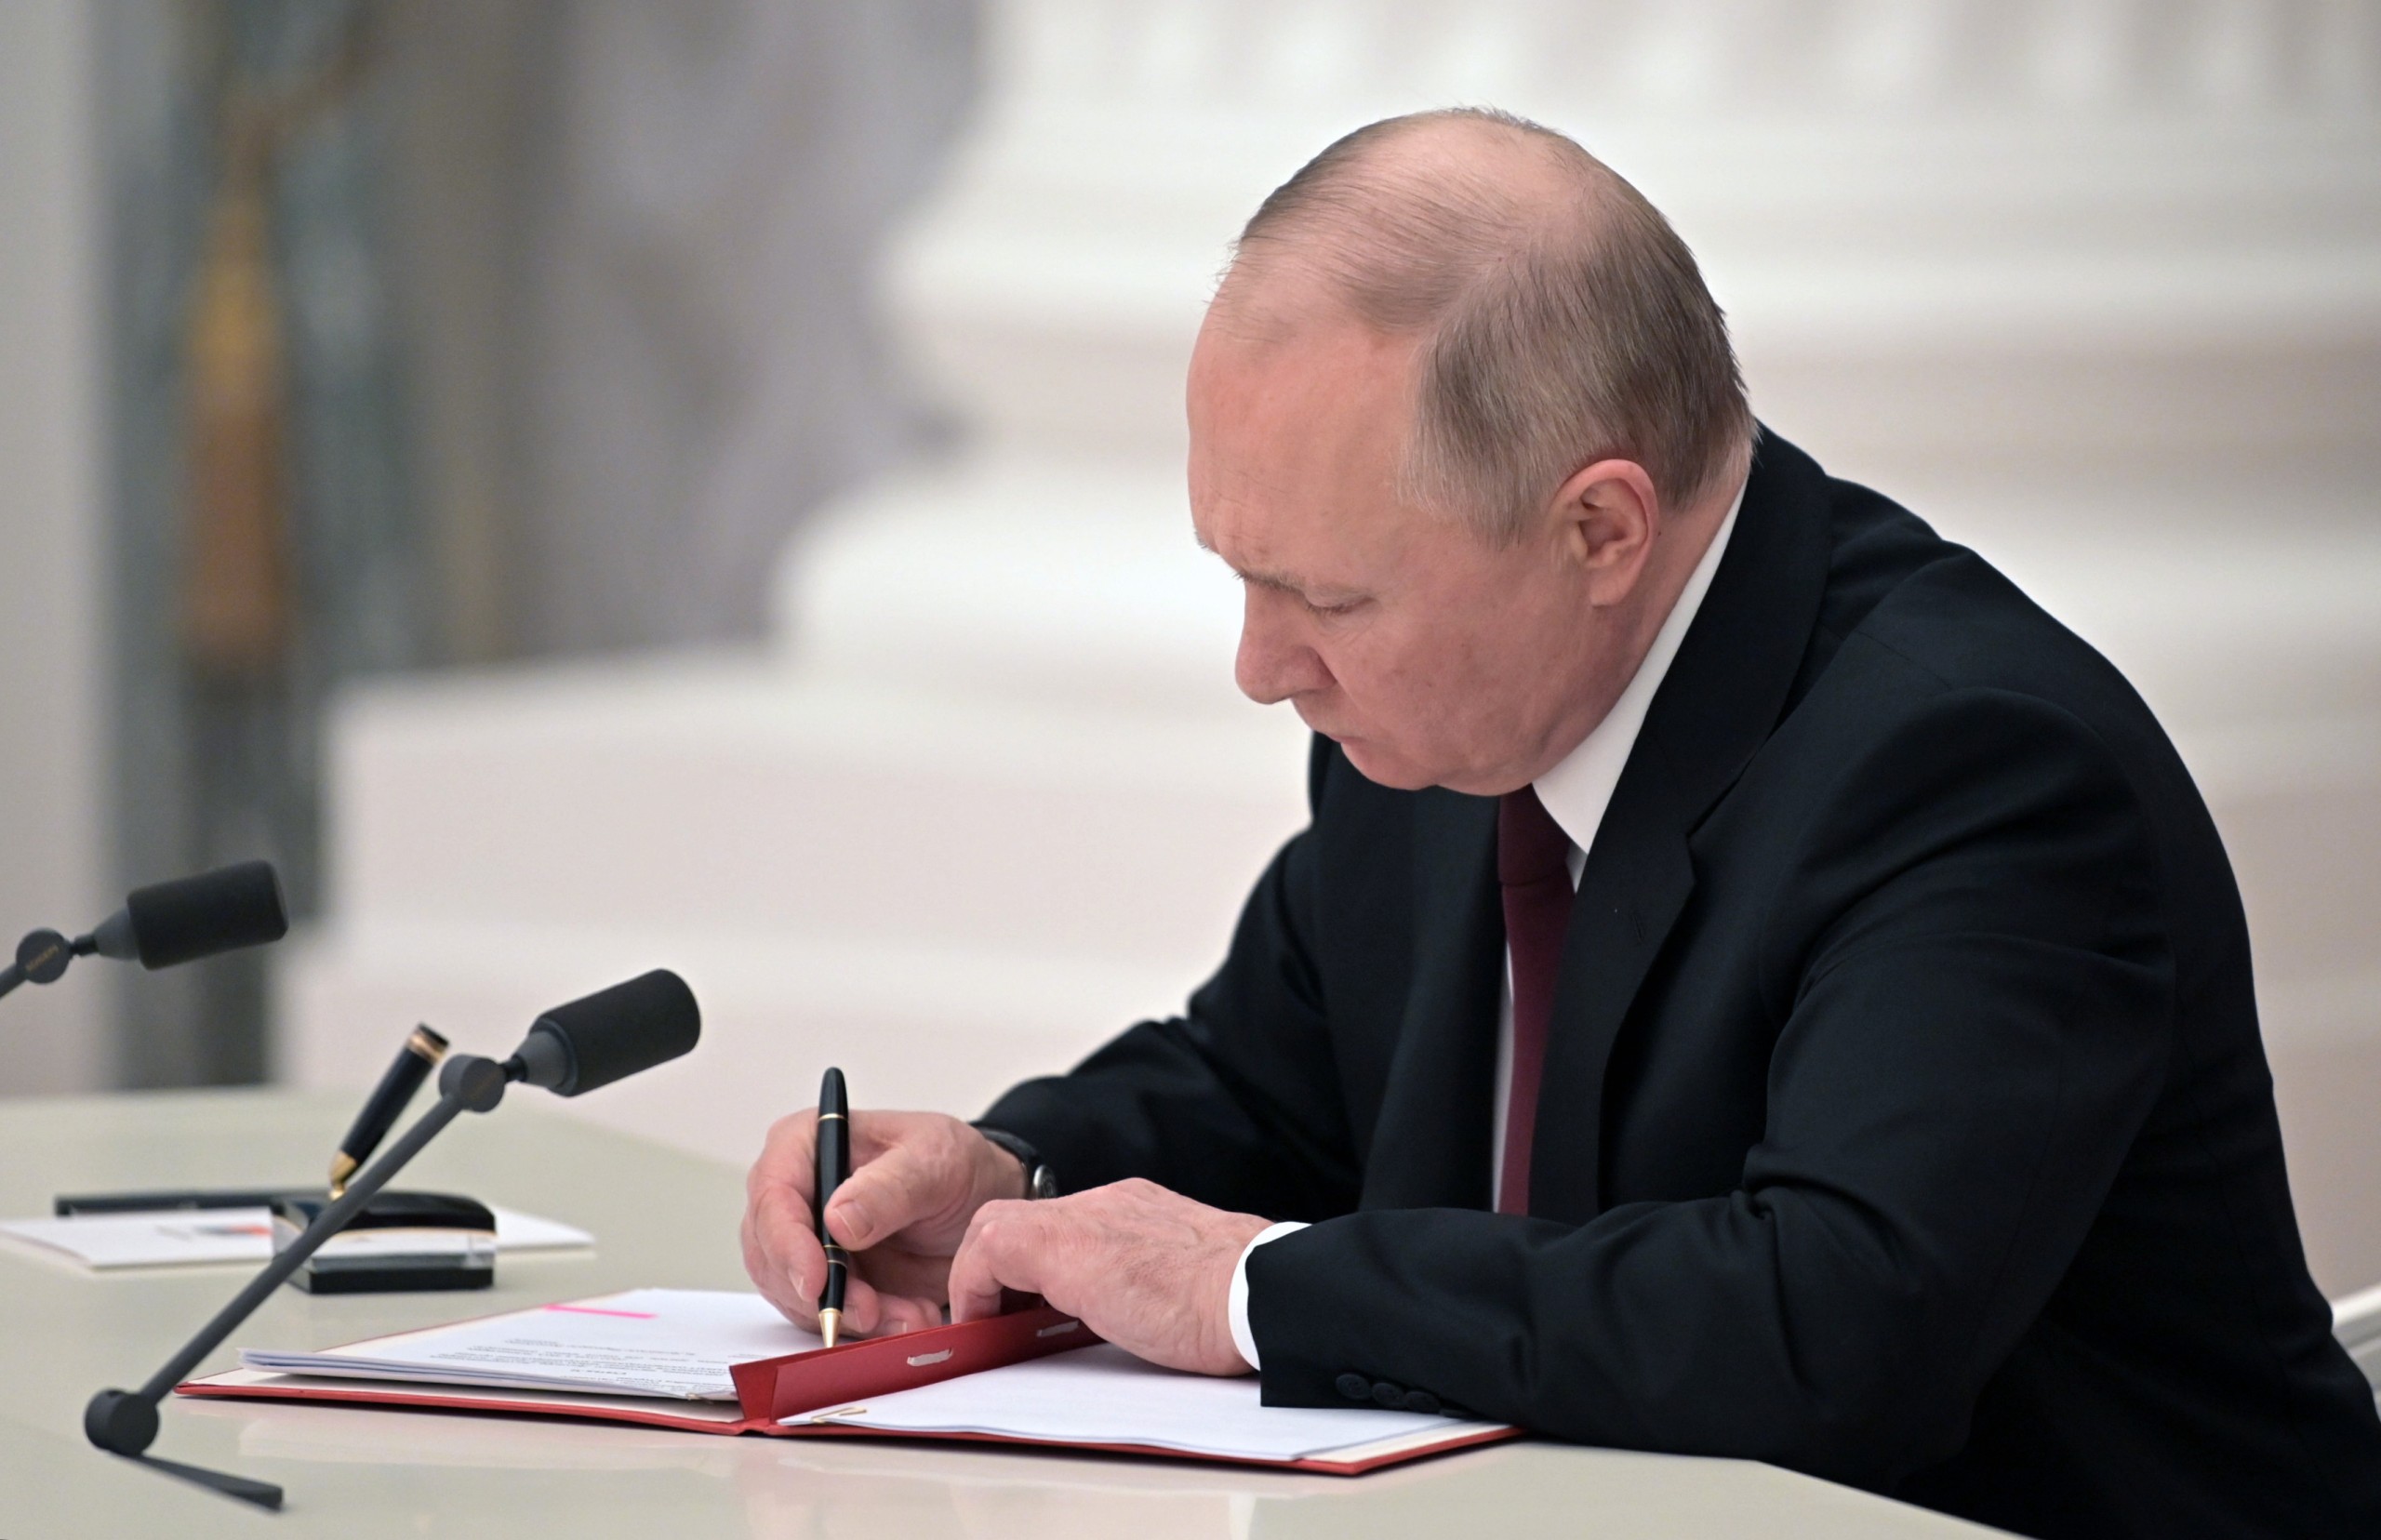 epa09776137 Russian President Vladimir Putin signs decrees on the recognition of the self-proclaimed Donetsk People's Republic (DPR) and the Luhansk People's Republic (LPR) in Moscow Kremlin in Moscow, Russia, 21 February 2022. The heads of the self-proclaimed Donetsk People's Republic (DPR) and the Luhansk People's Republic (LPR) asked the President of Russia to recognize the self-proclaimed republics. This issue was discussed at a meeting of the Security Council of the Russian Federation, Vladimir Putin appealed to the Federal Assembly of the Russian Federation to ratify the treaty of friendship and mutual assistance with the DPR-LPR. Putin  signed decrees on the recognition of the self-proclaimed Donetsk People's Republic (DPR) and the Luhansk People's Republic (LPR).  EPA/ALEKSEY NIKOLSKYI/SPUTNIK/KREMLIN POOL / POOL